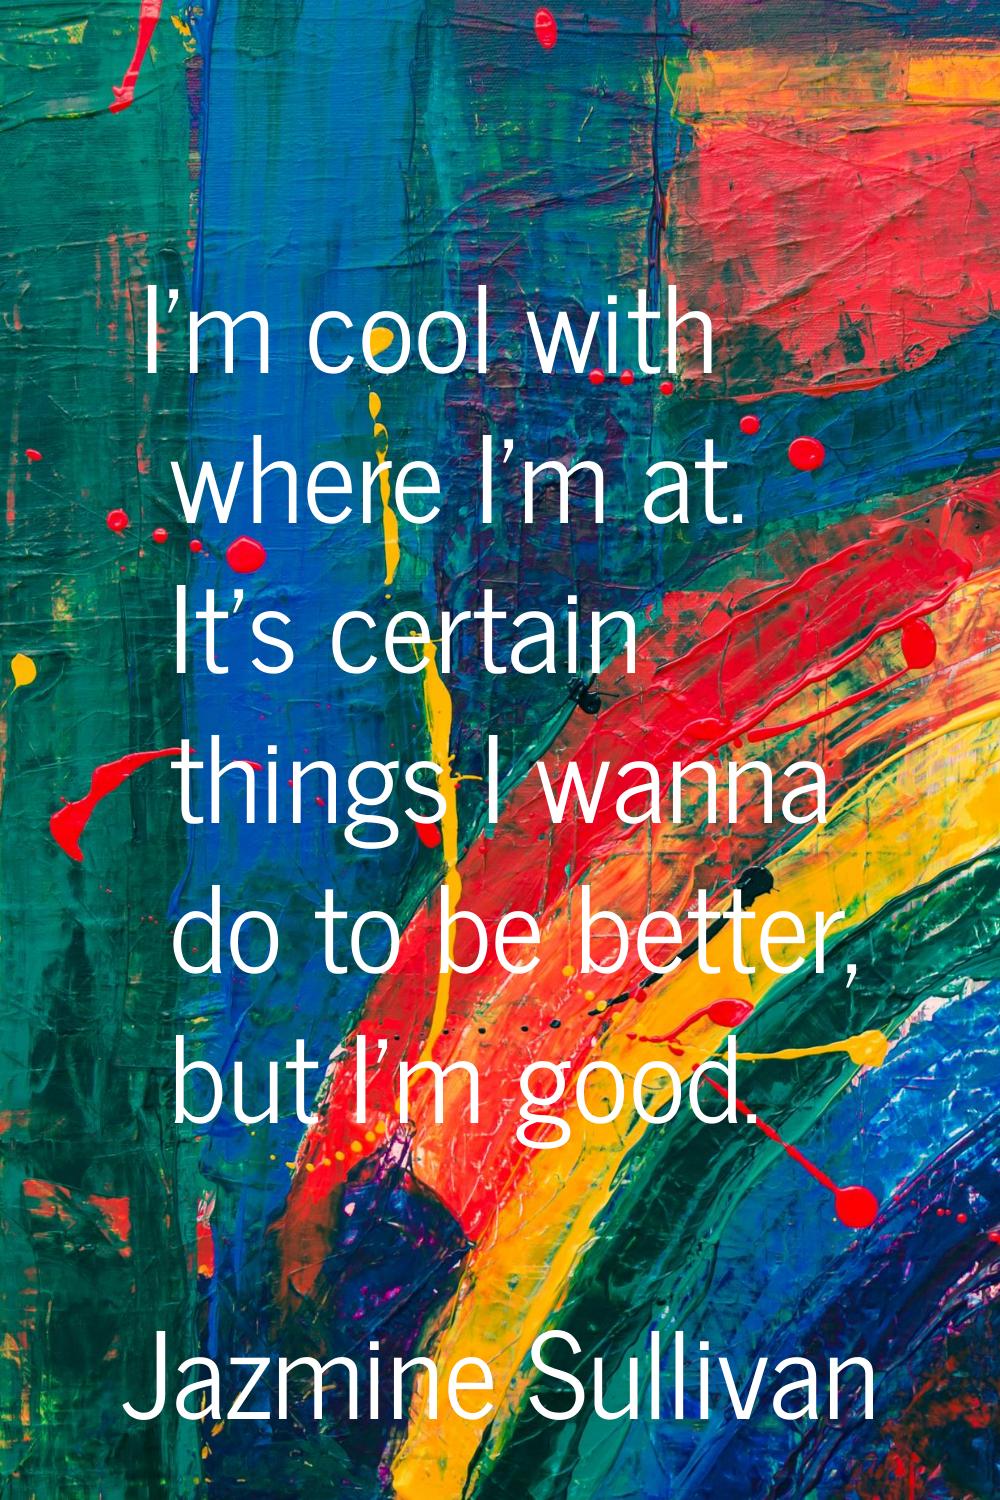 I'm cool with where I'm at. It's certain things I wanna do to be better, but I'm good.